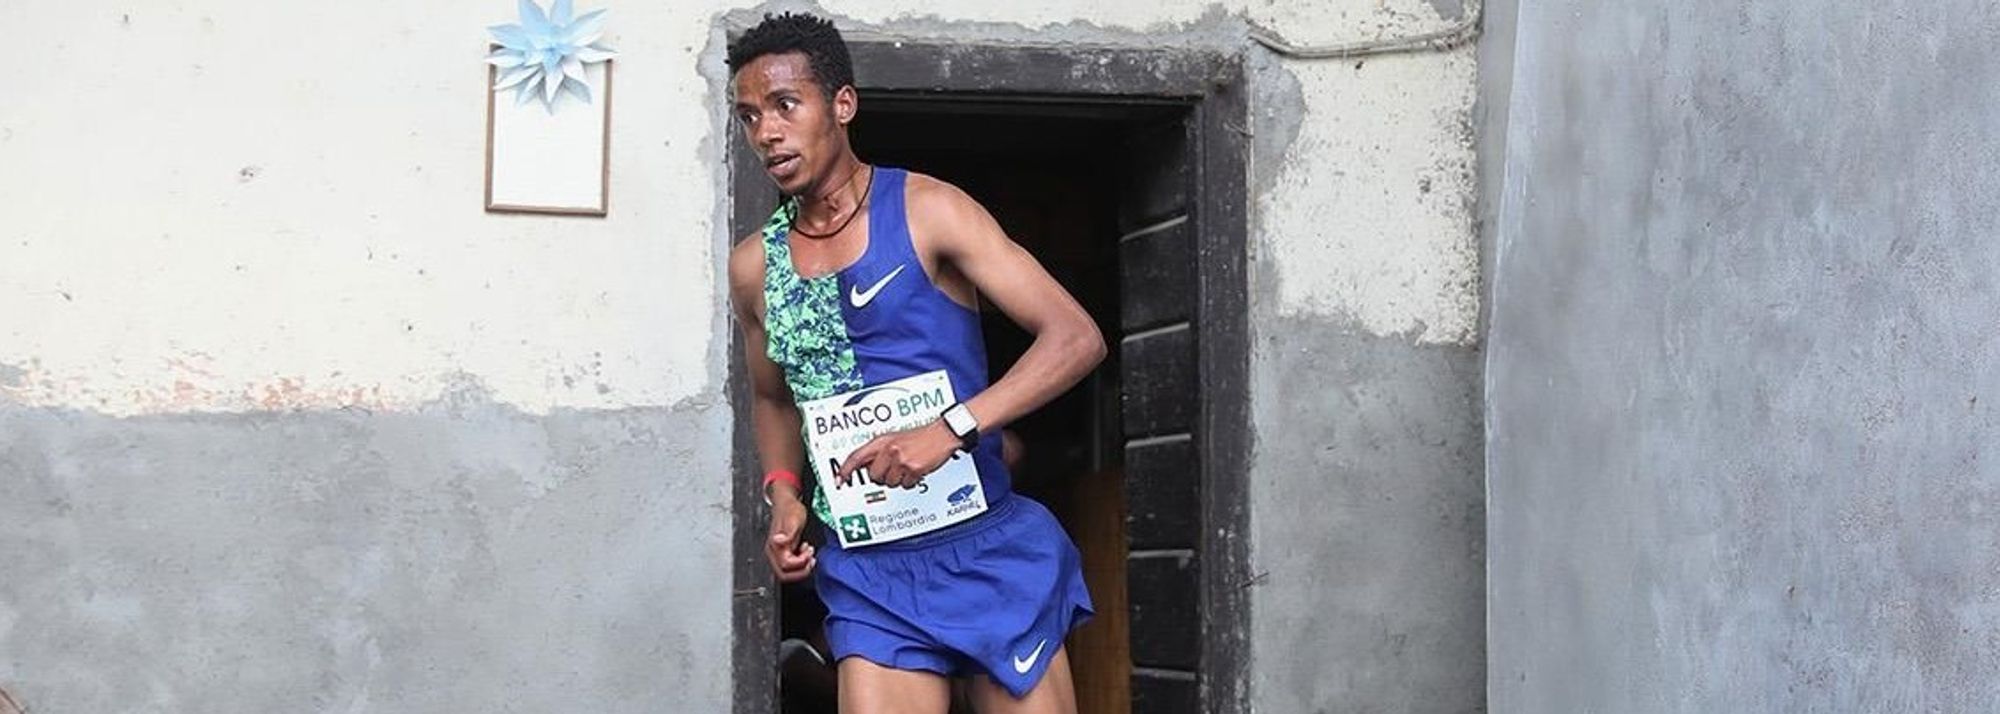 Ethiopia’s Nibret Melak will be looking to retain his title at the 90th milestone edition of the Cinque Mulini.